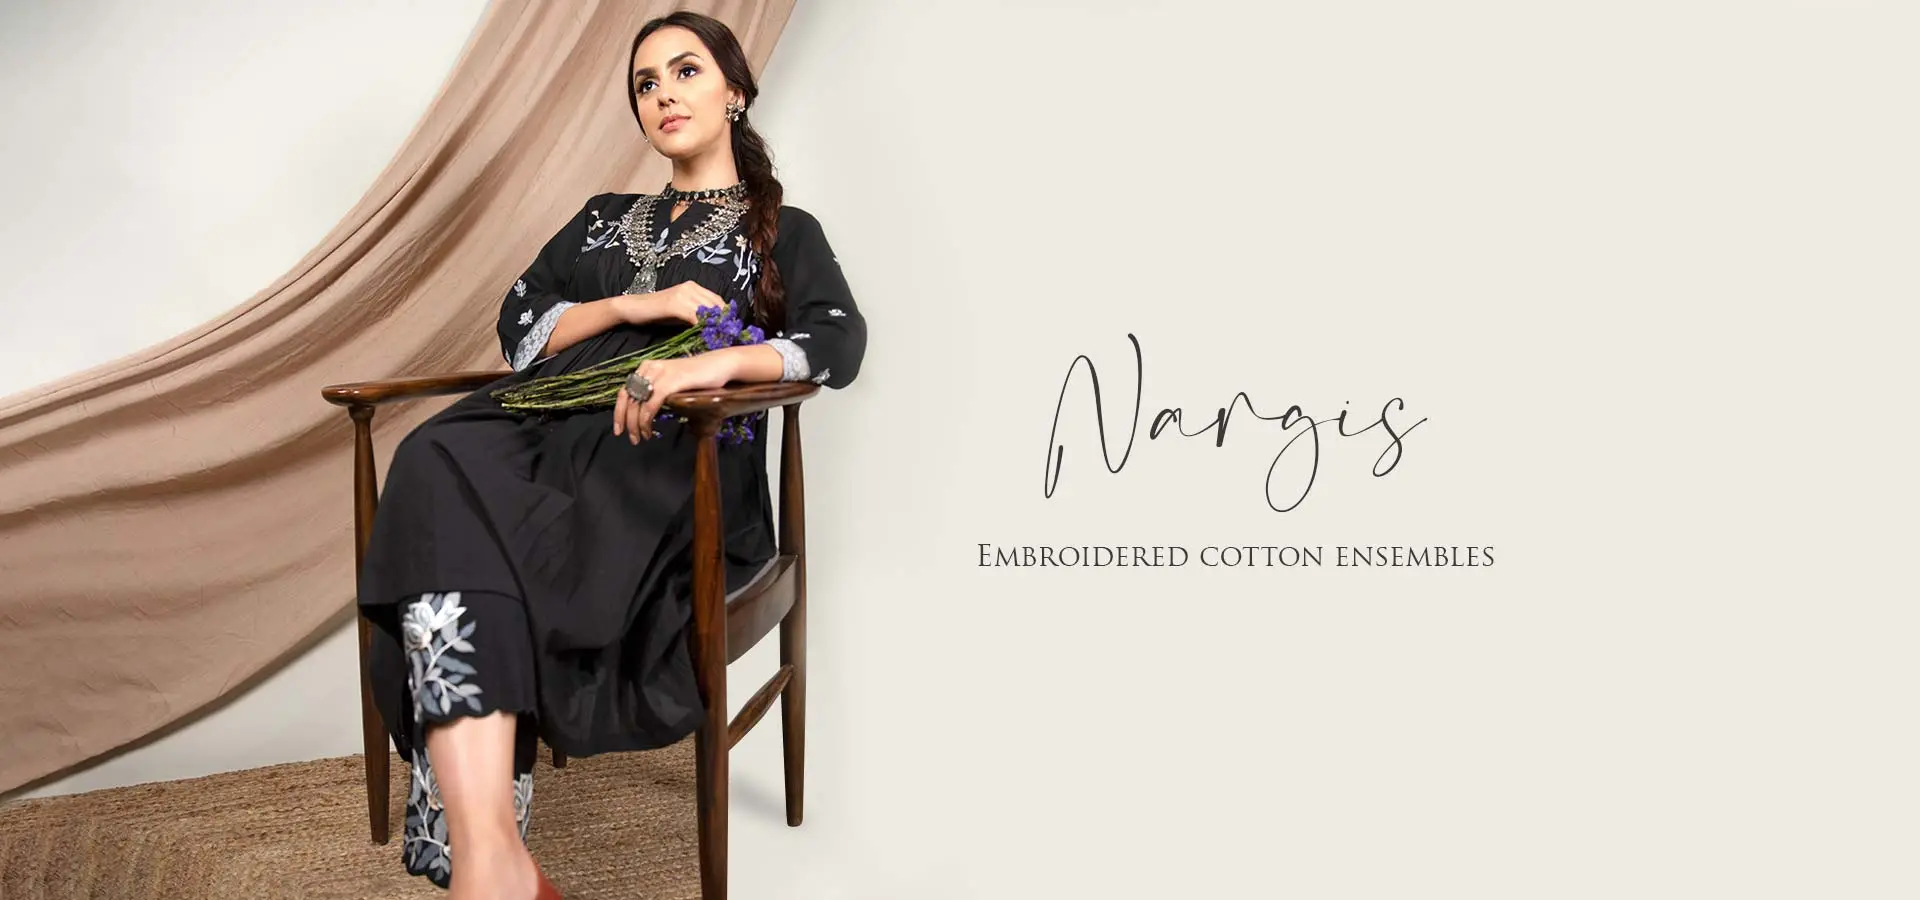 nargis collections